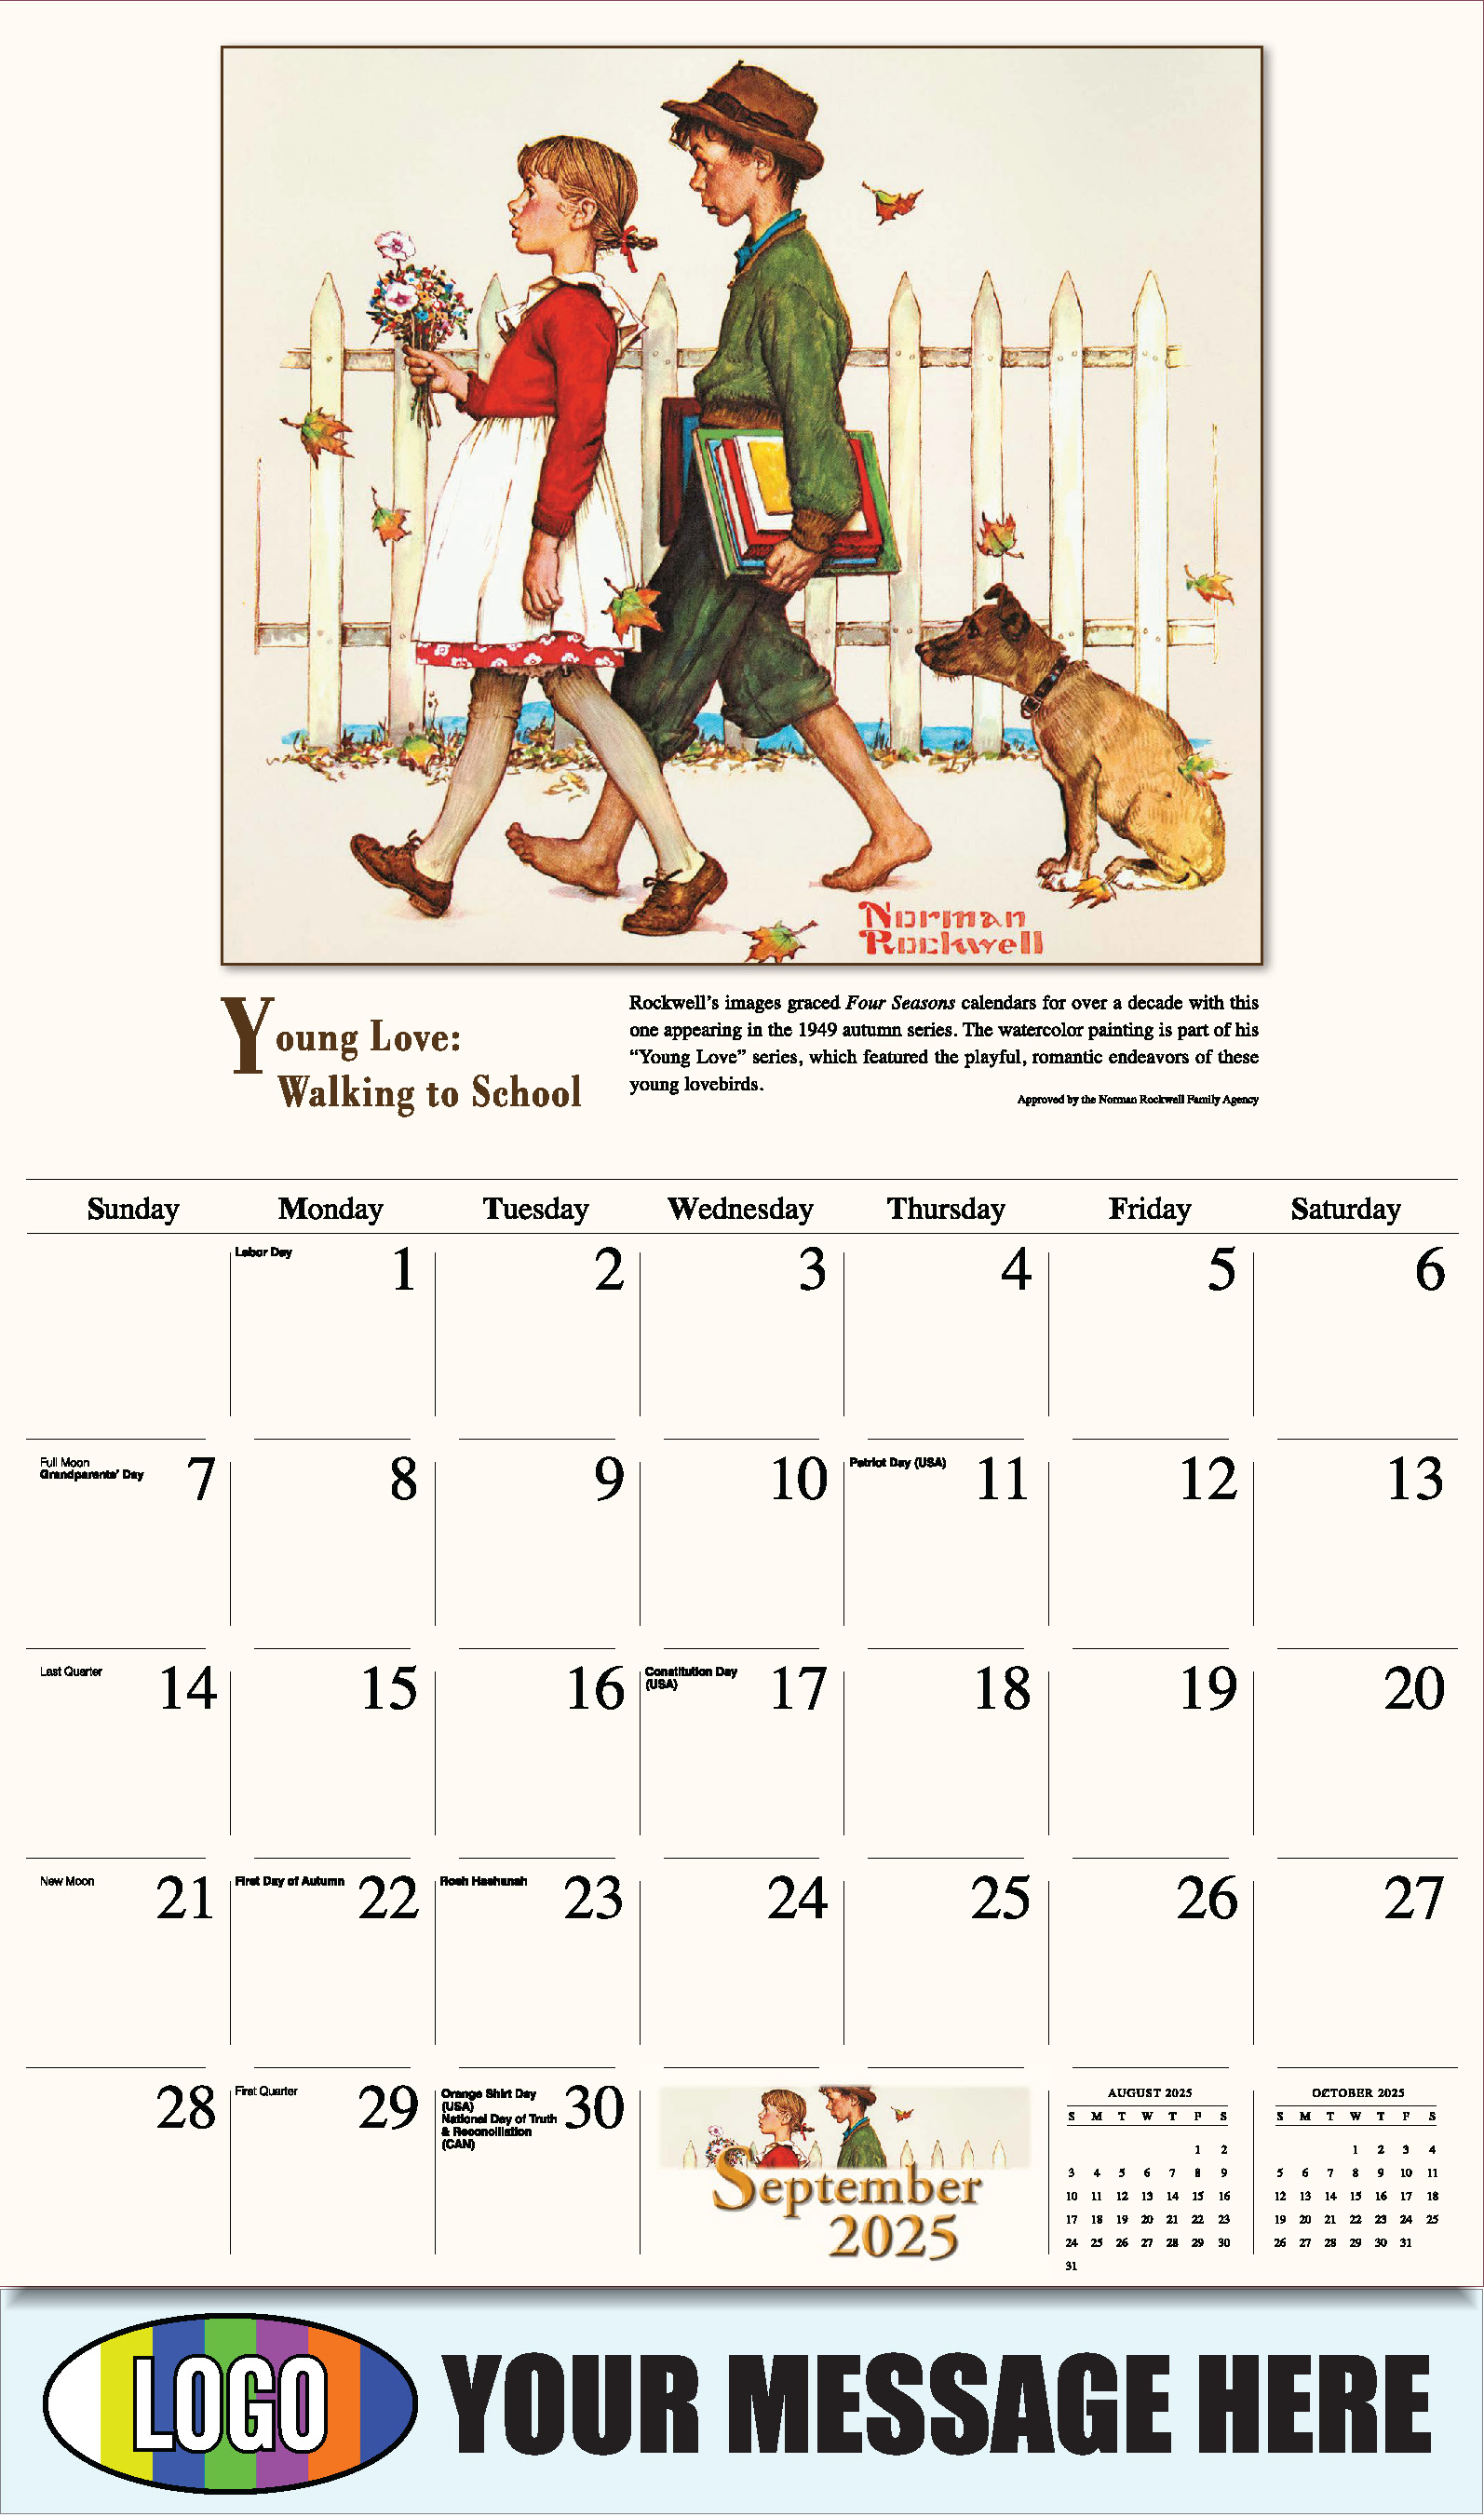 Memorable Images by Norman Rockwell 2025 Business Promotional Wall Calendar - September